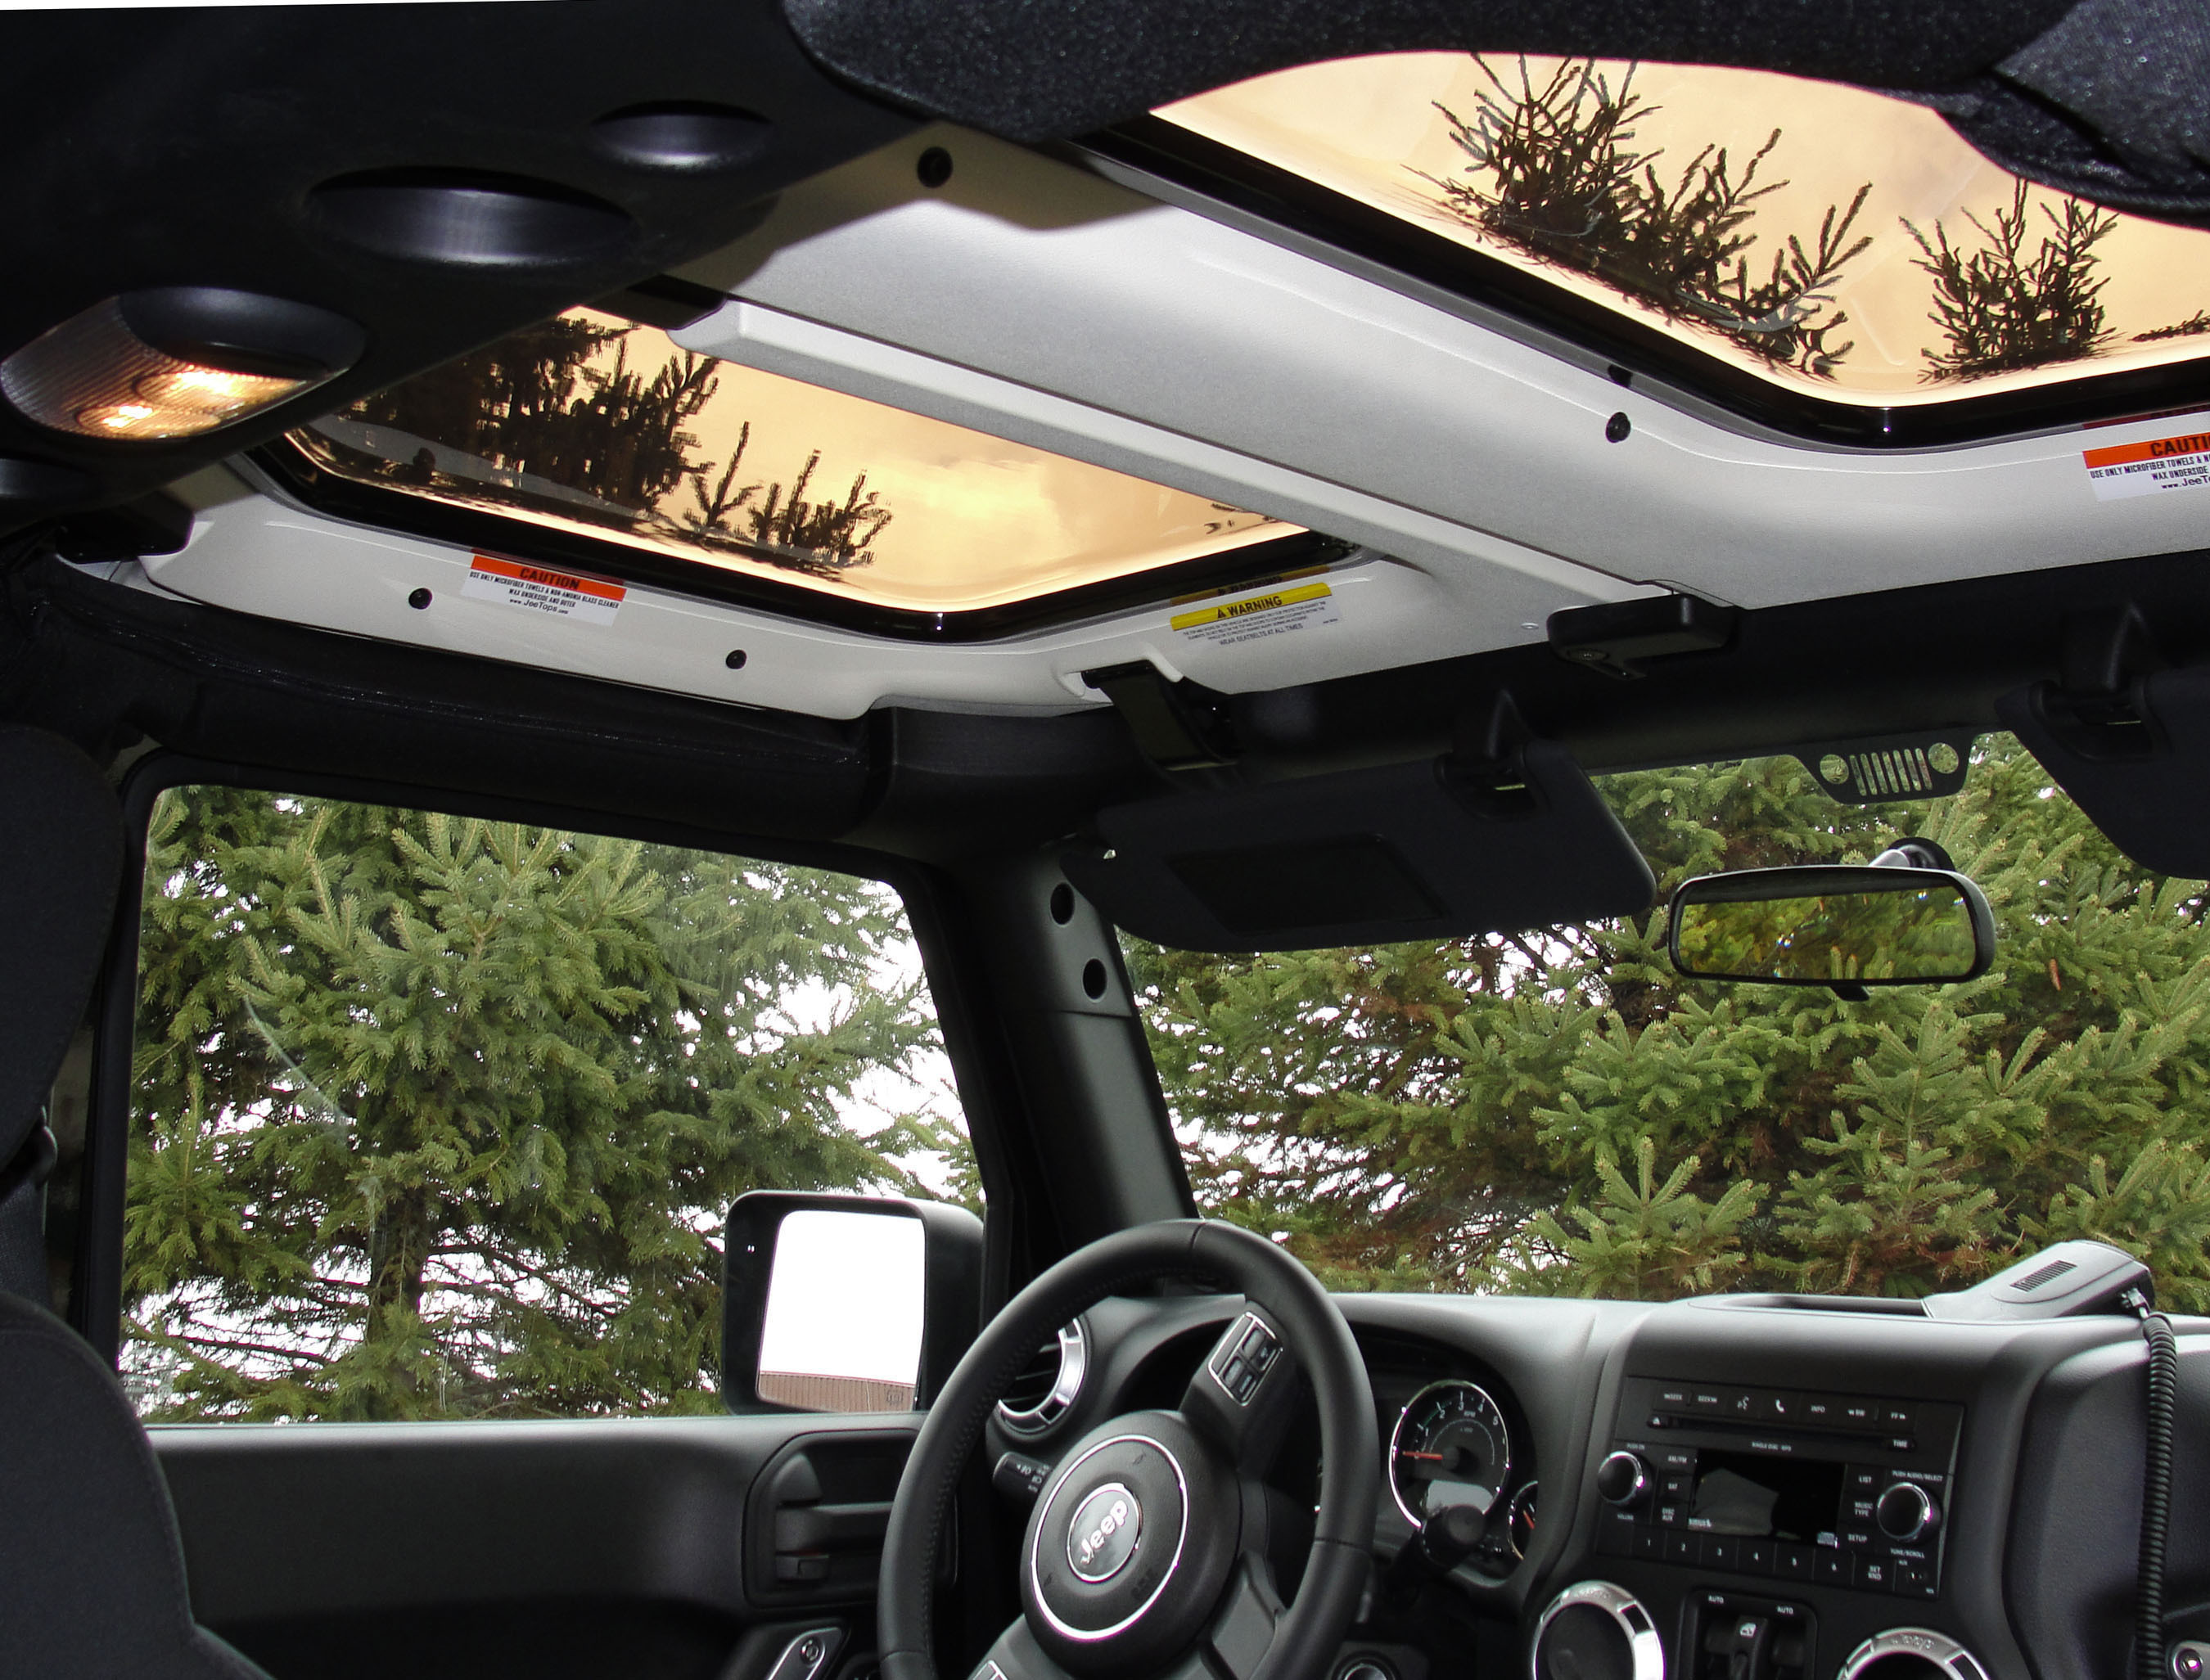 New JeeTops™ Sunroof Receives Strong Reviews